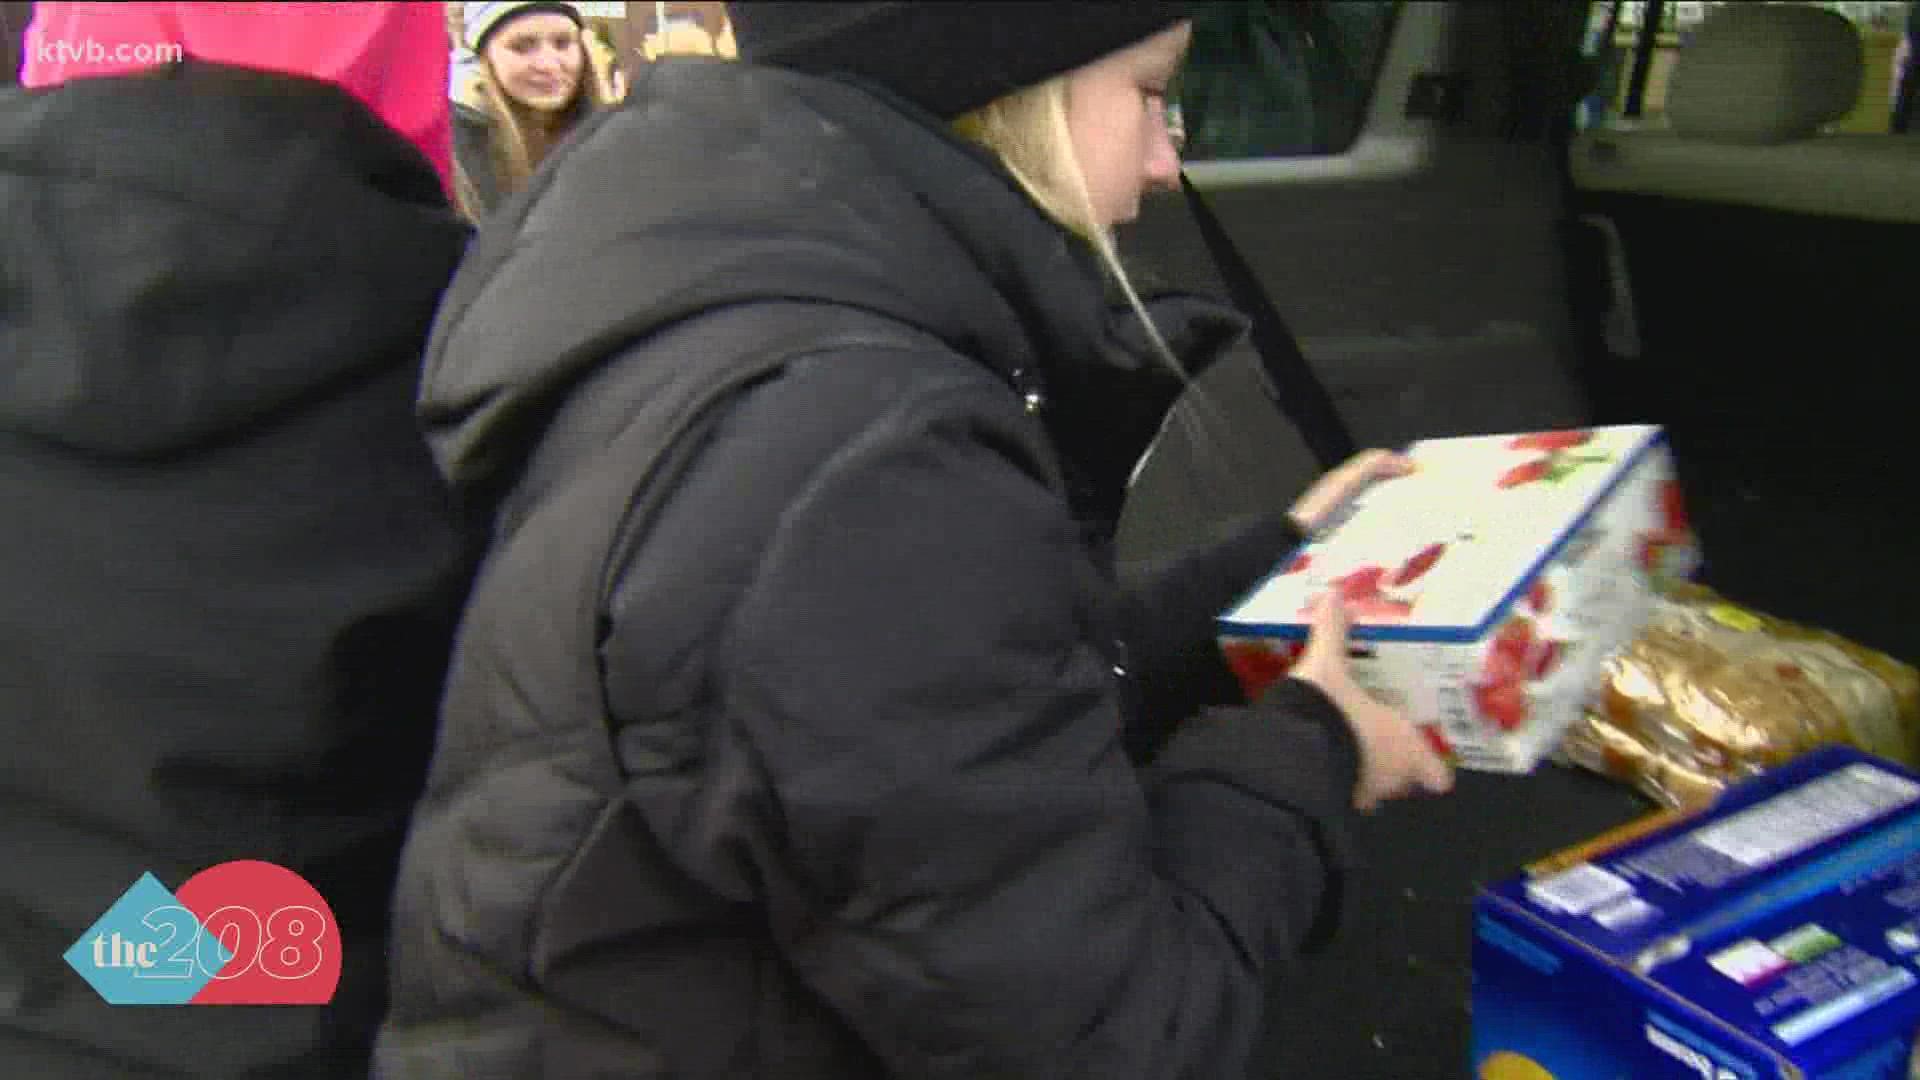 With the rest of the holiday season on the way, food donations are still needed at the Idaho Foodbank.